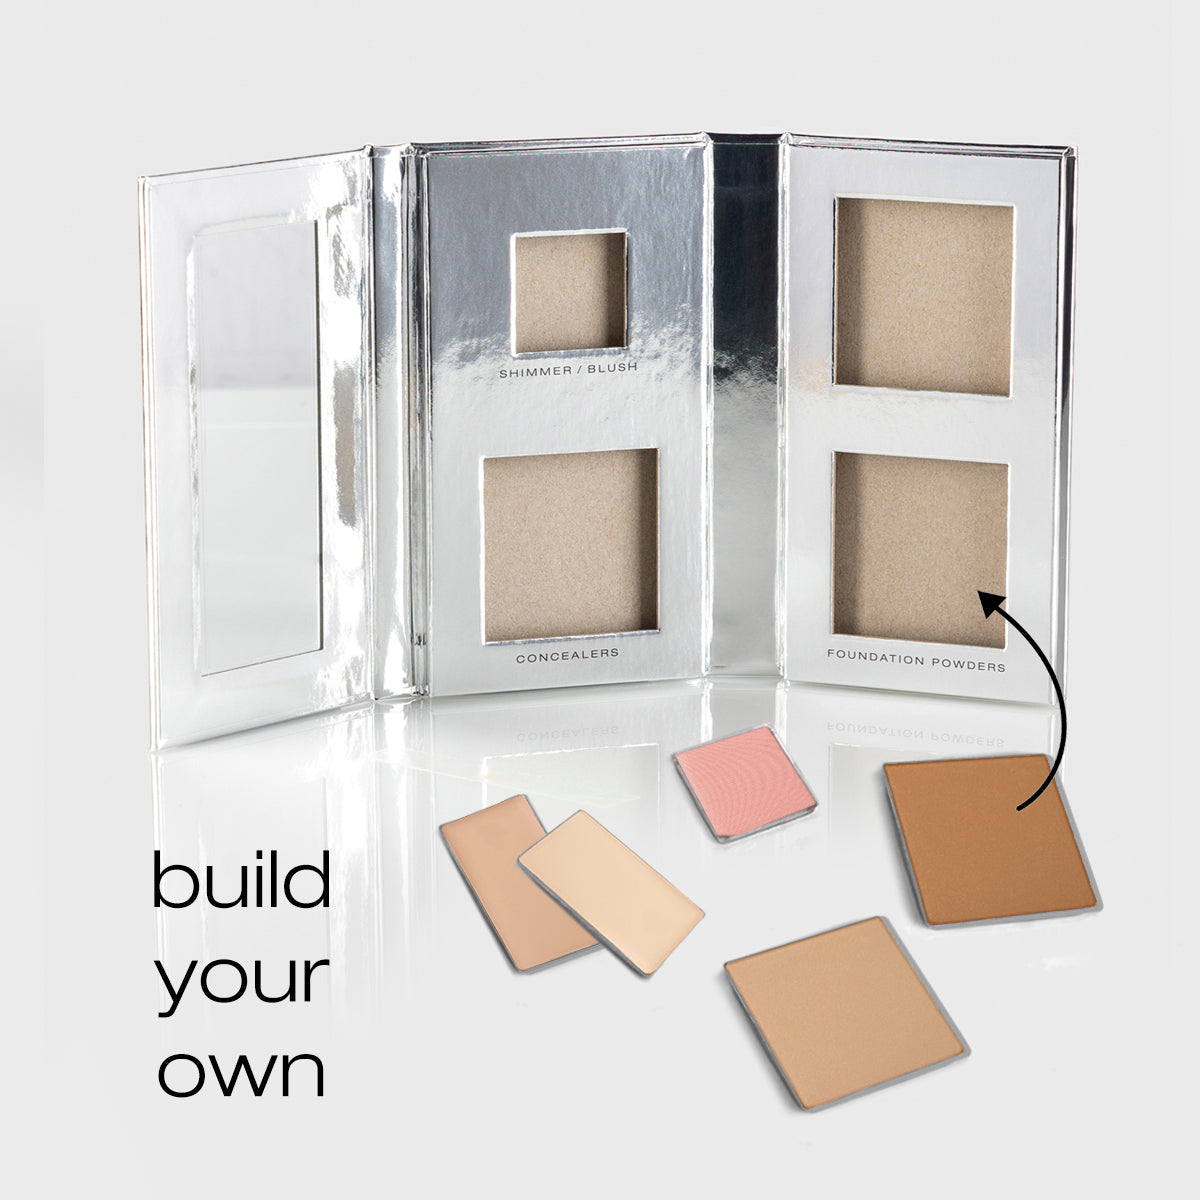 Fold Out Complexion Build your palette product showing an empty palette and one shimmer/blush pan, two concealer pans, and two foundation powder pans